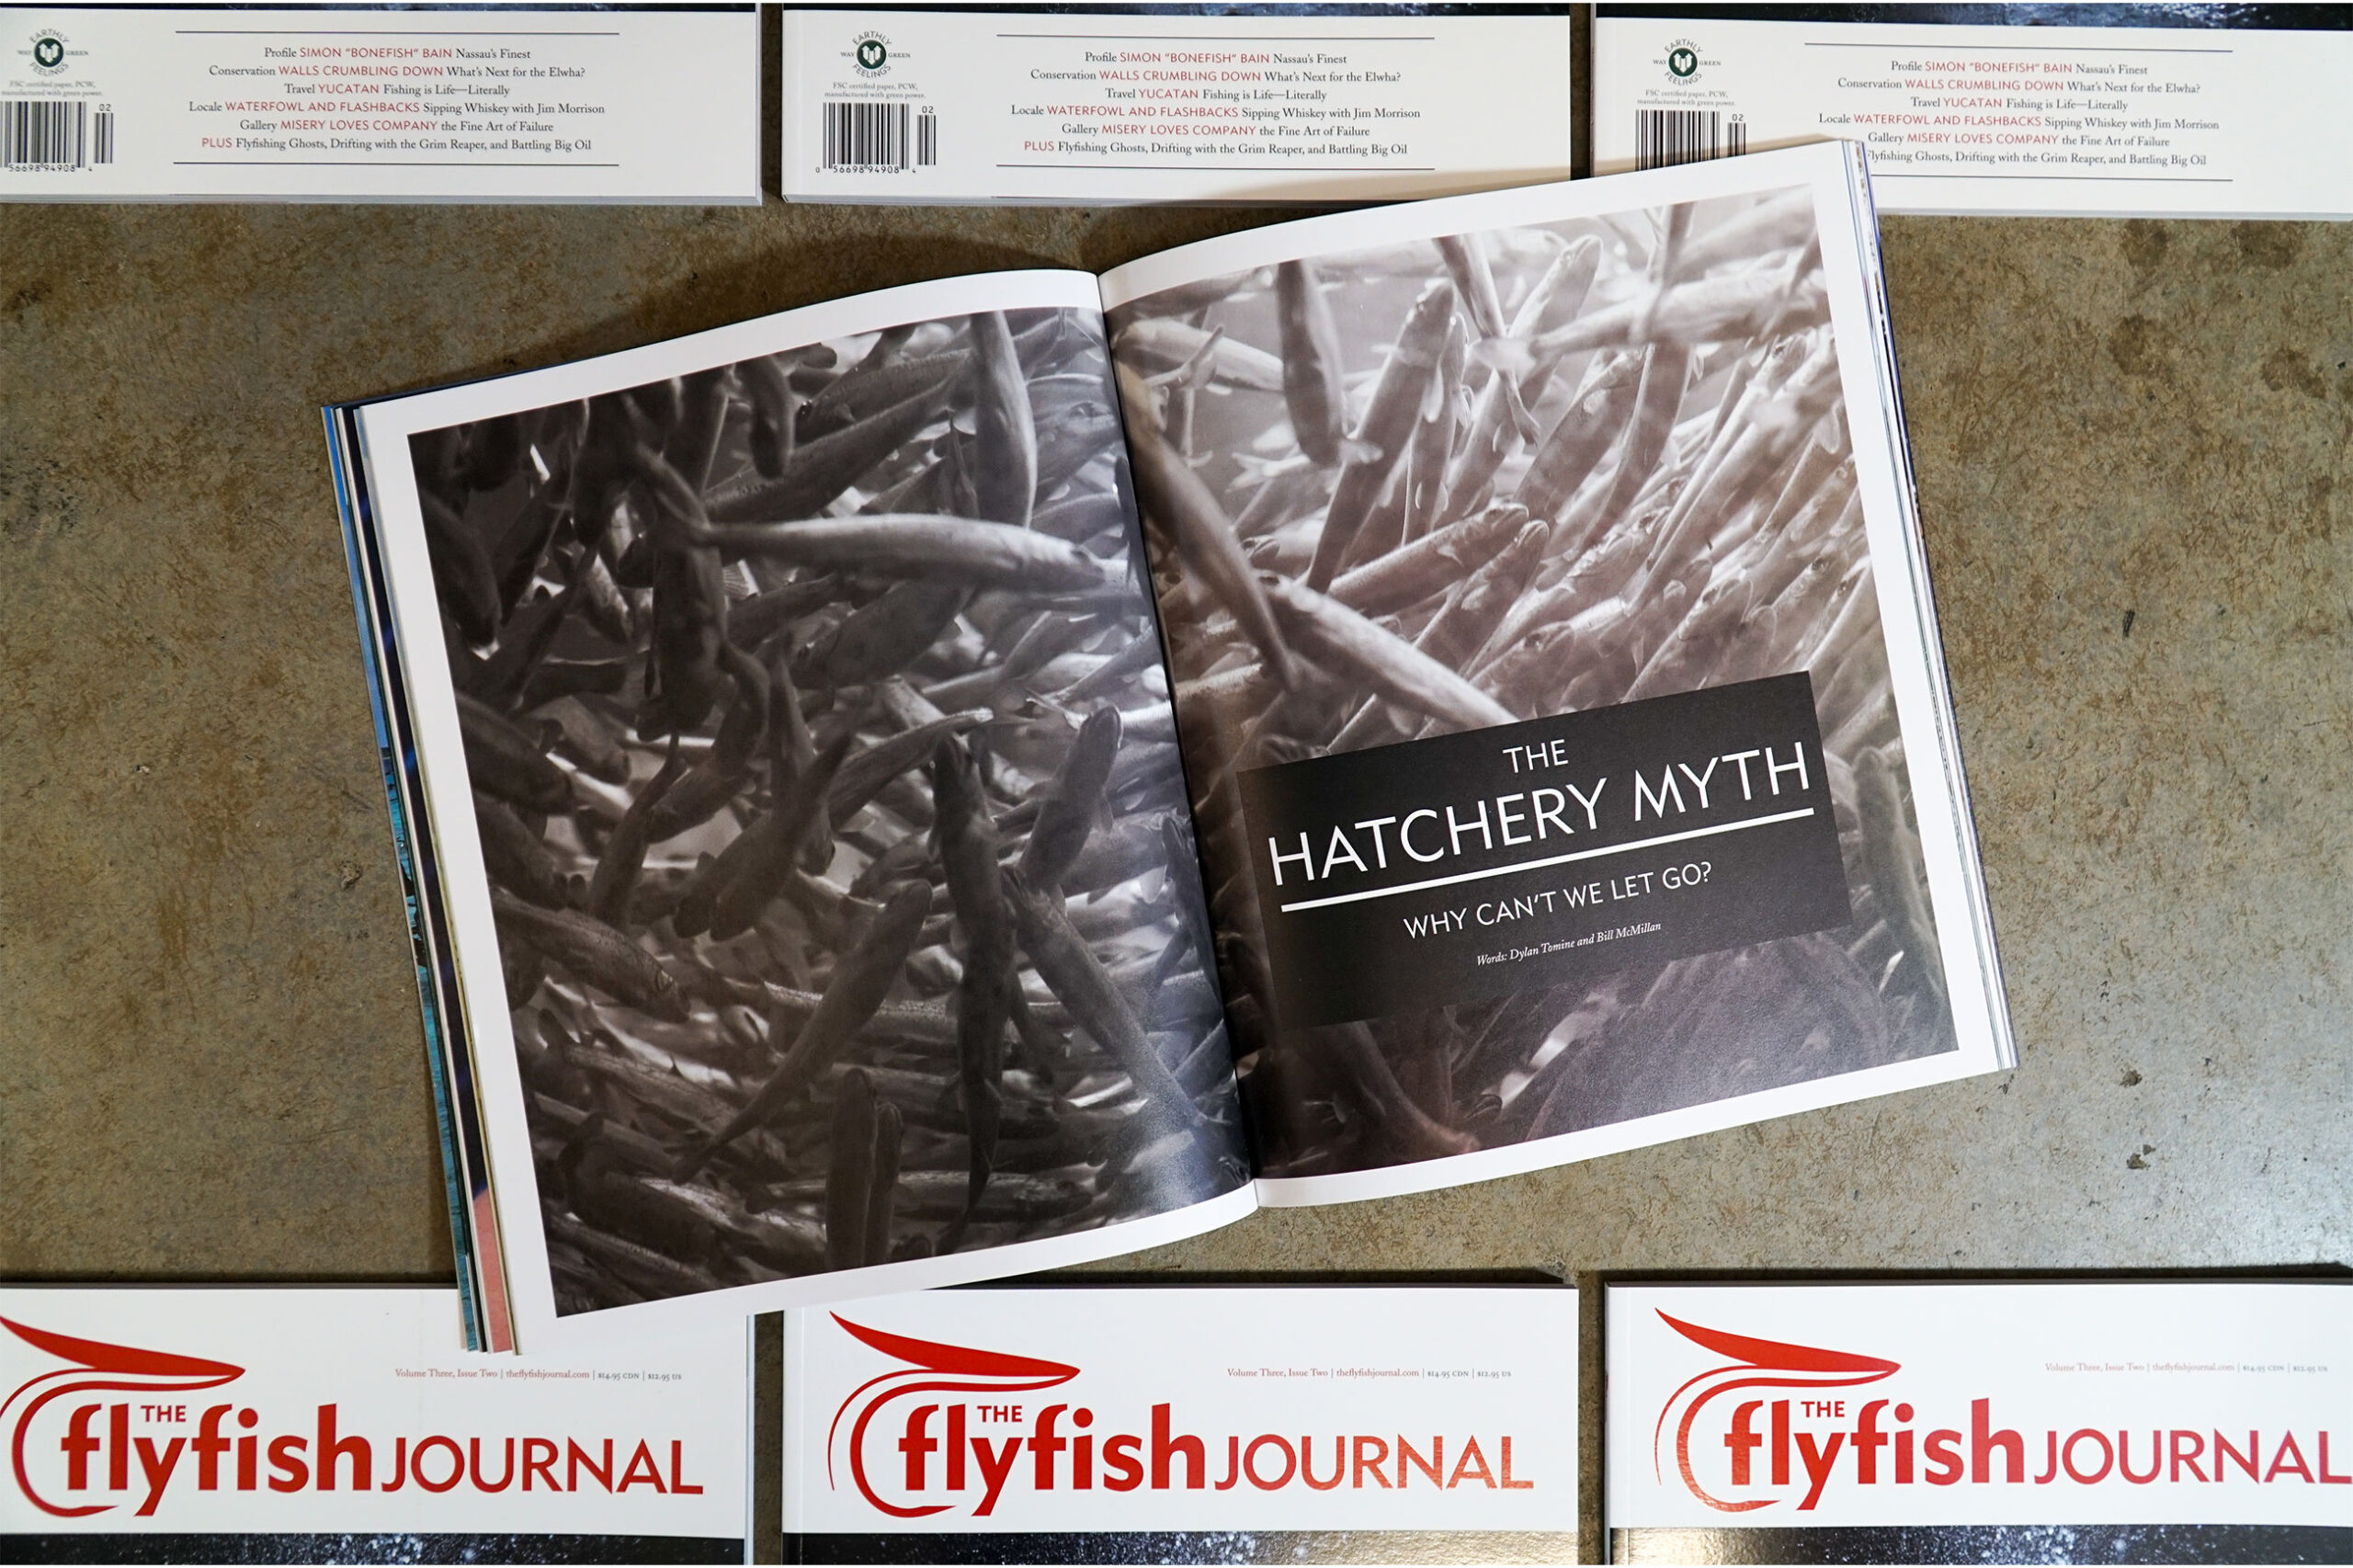 The Flyfish Journal Volume 3 Issue 2 Feature The Hatchery Myth